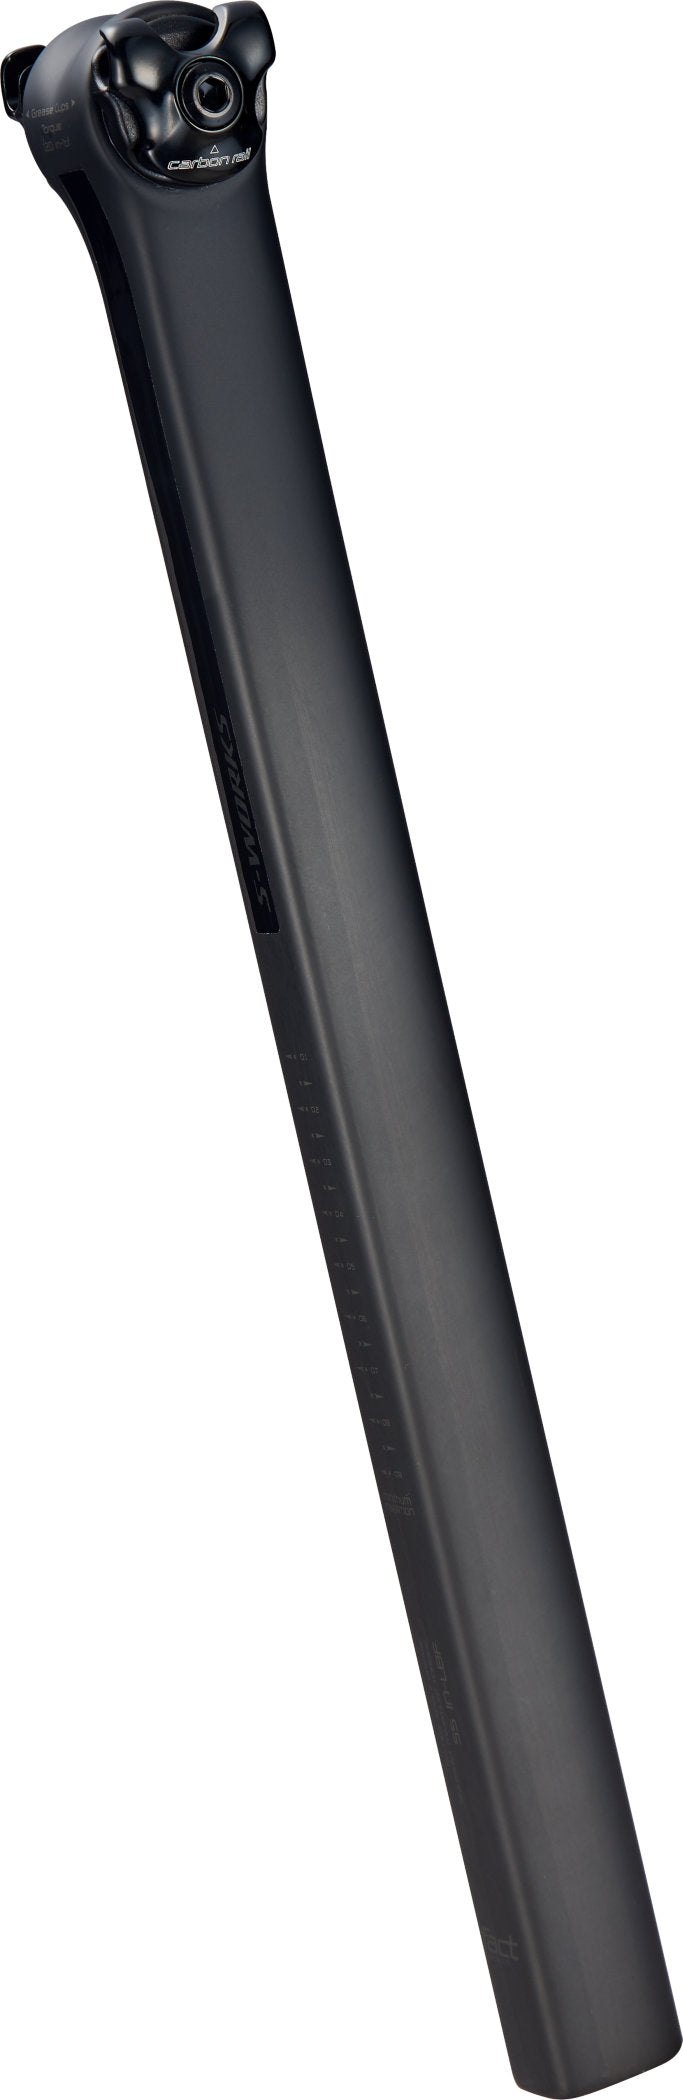 Specialized S-Works Pavé SL Carbon Bicycle Seatpost